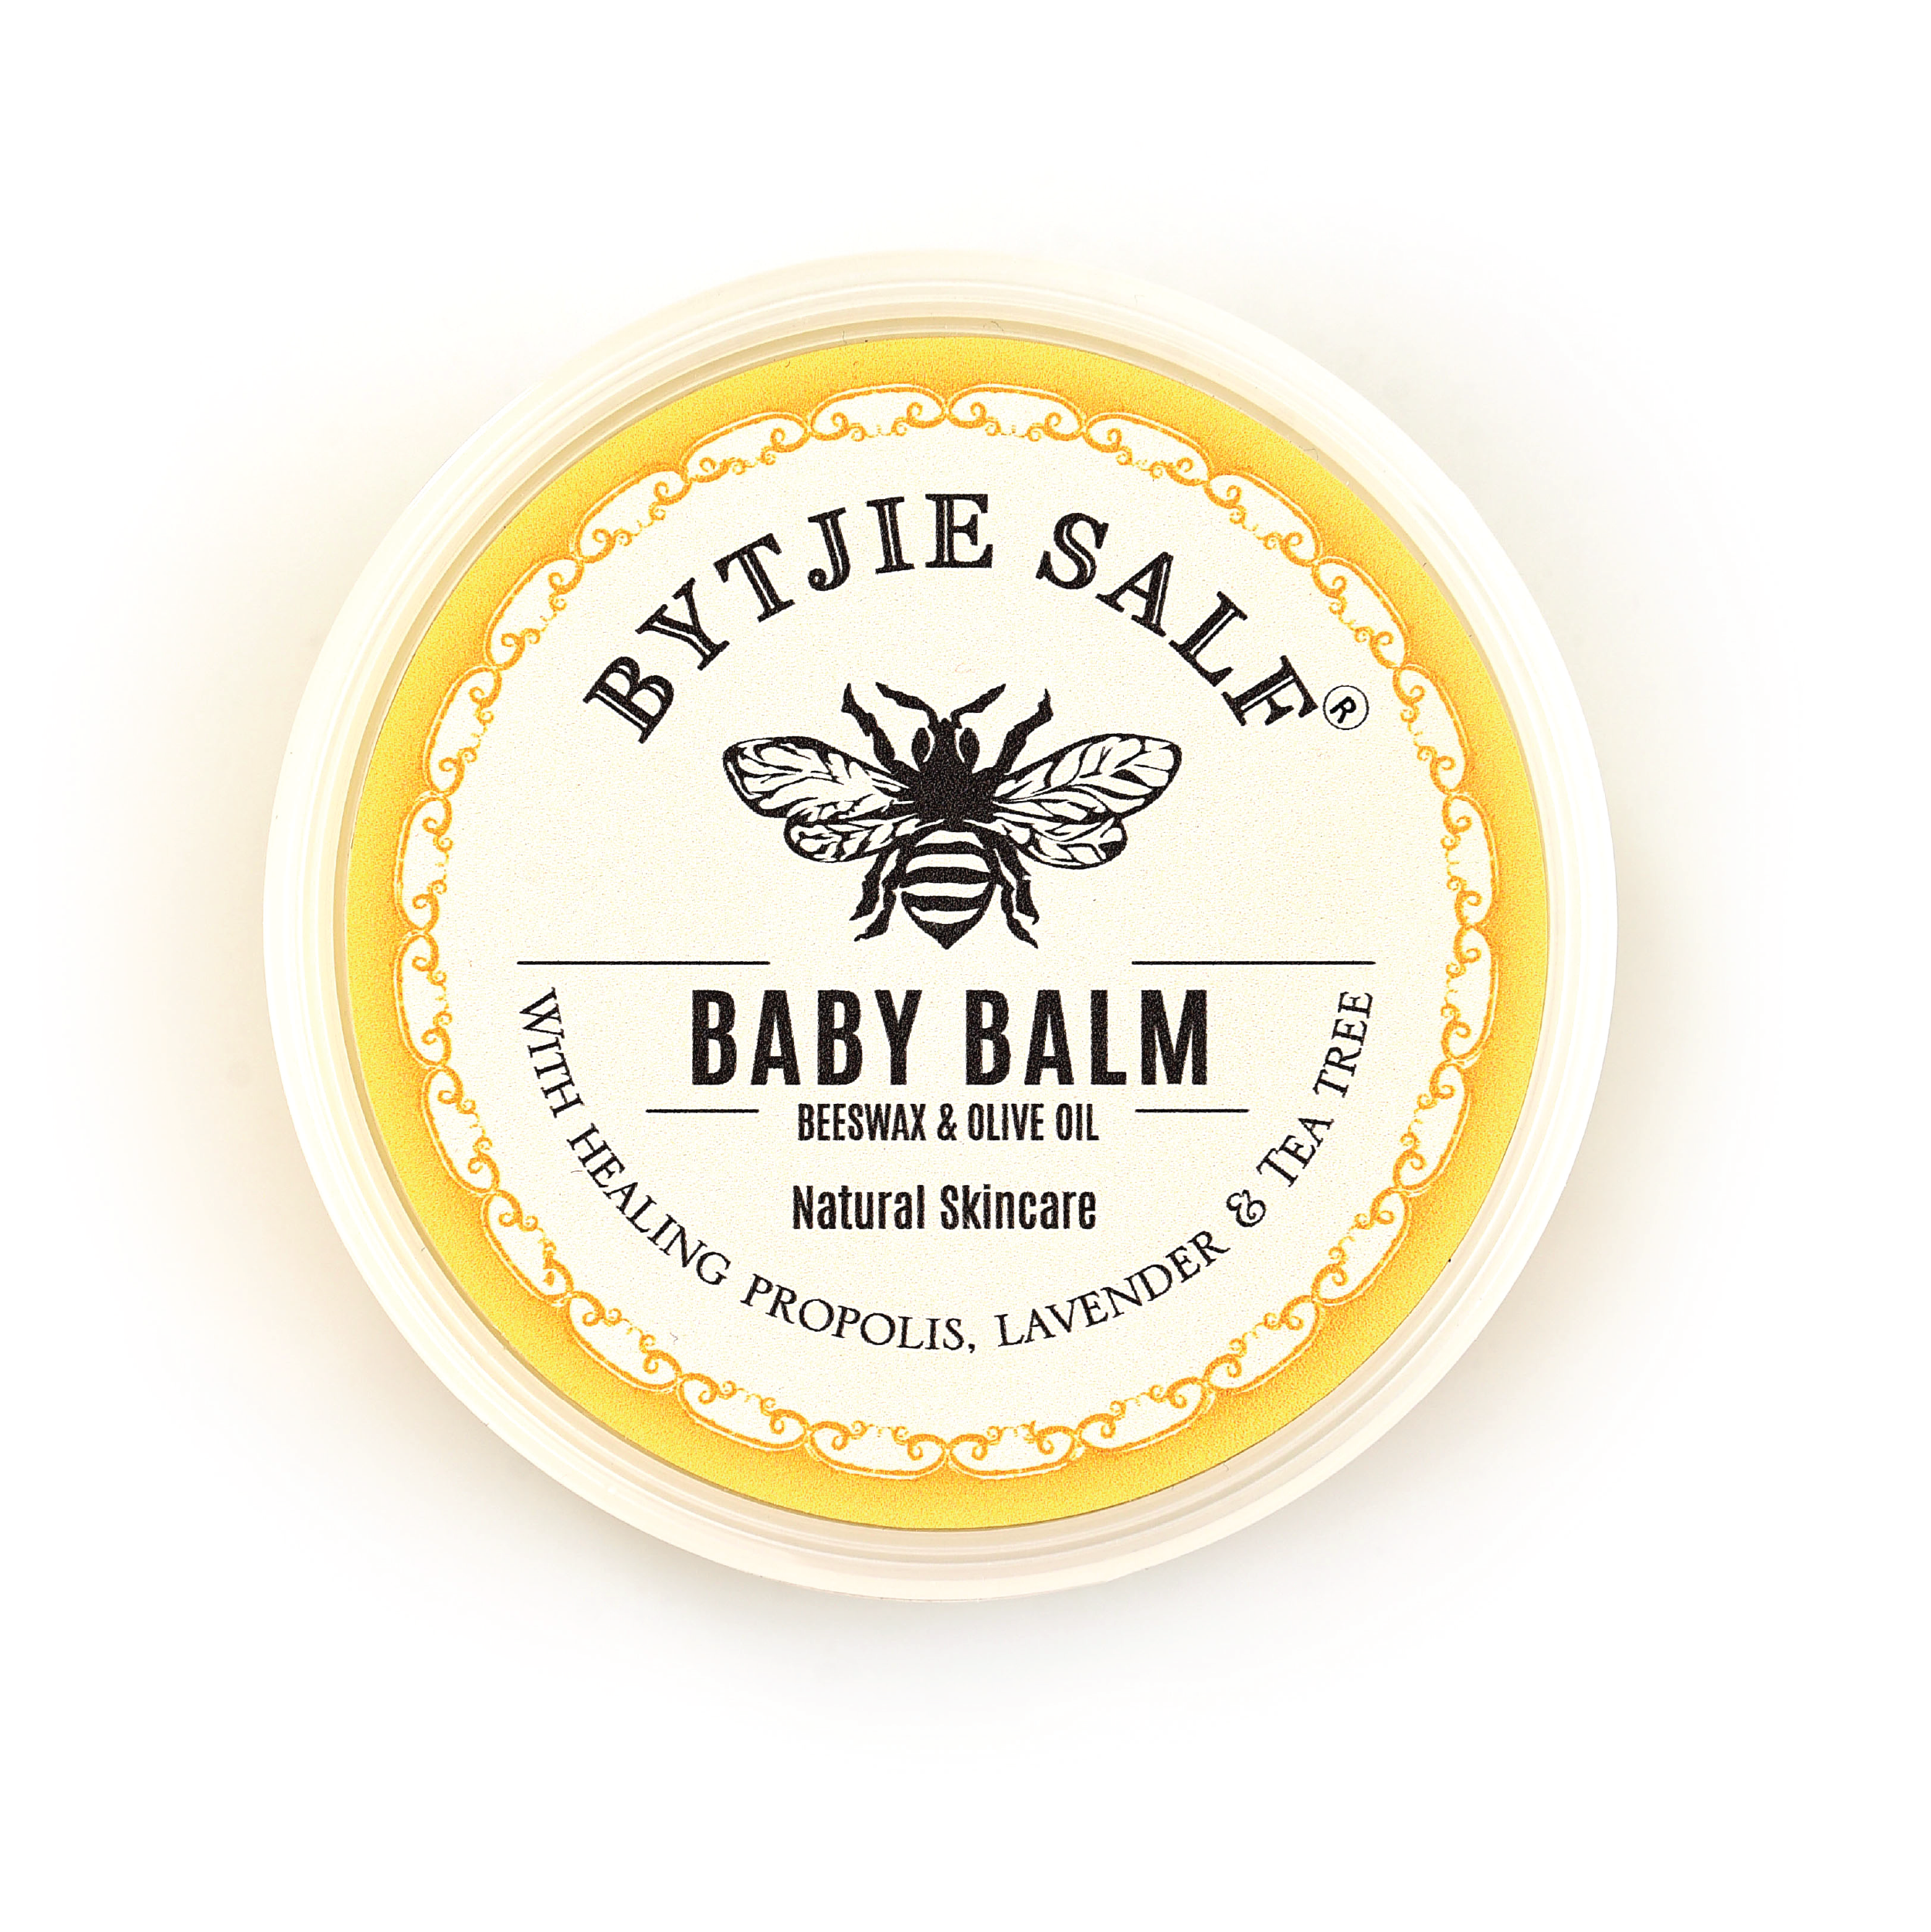 beeswax and olive oil natural skincare for baby. prevent nappy rash treat nappy rash safe from newborn cloth nappy safe